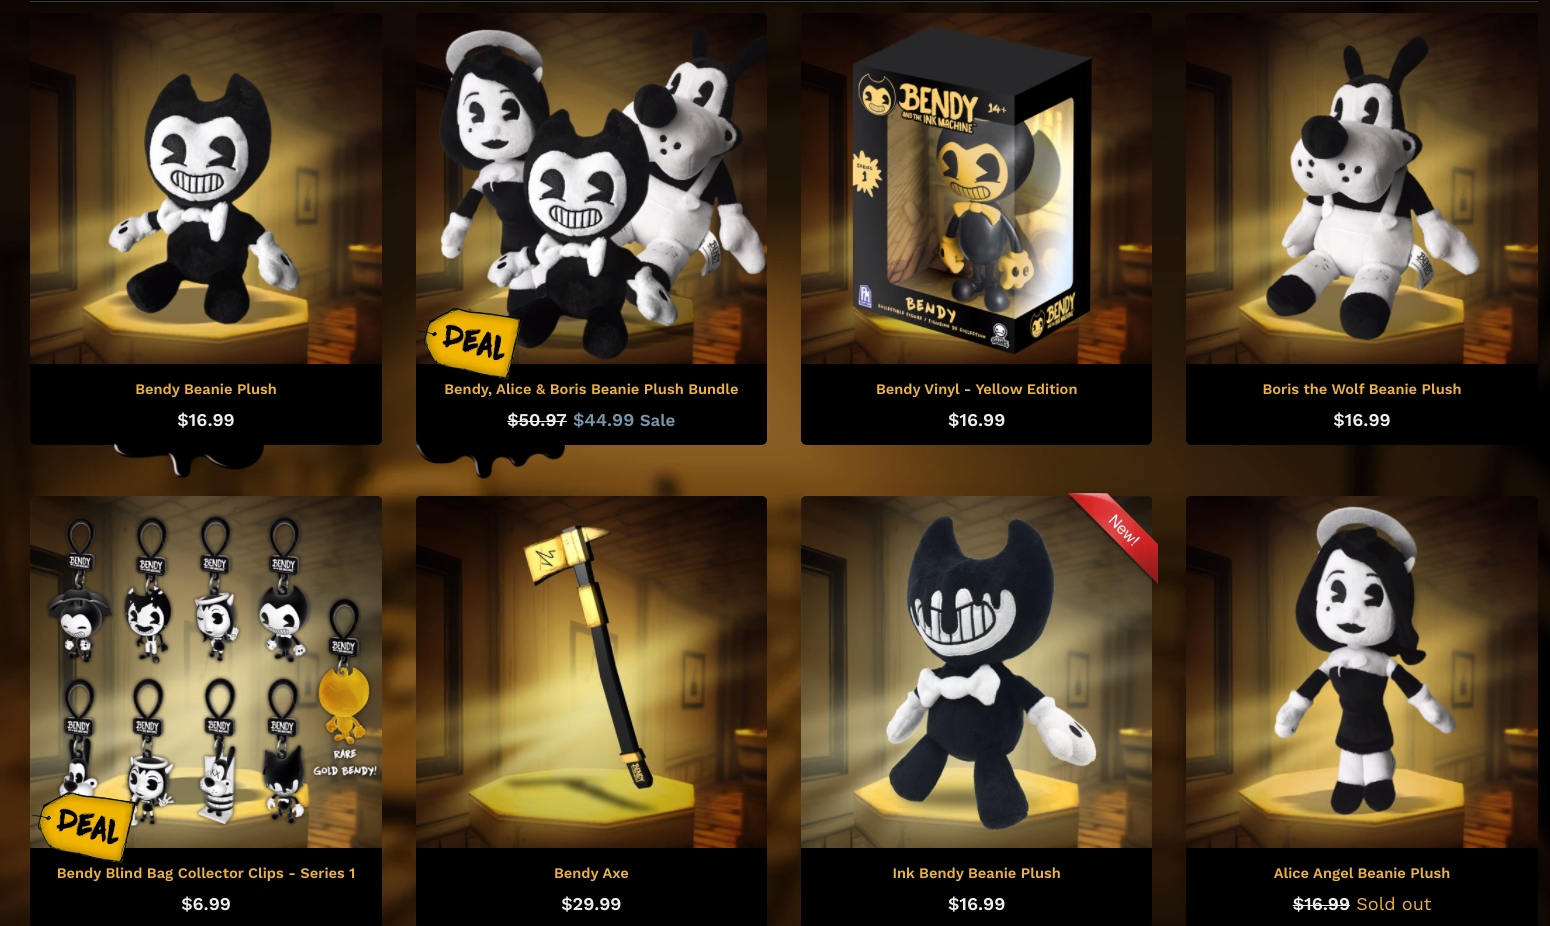 Bendy has seen all kinds of associated merch for sale